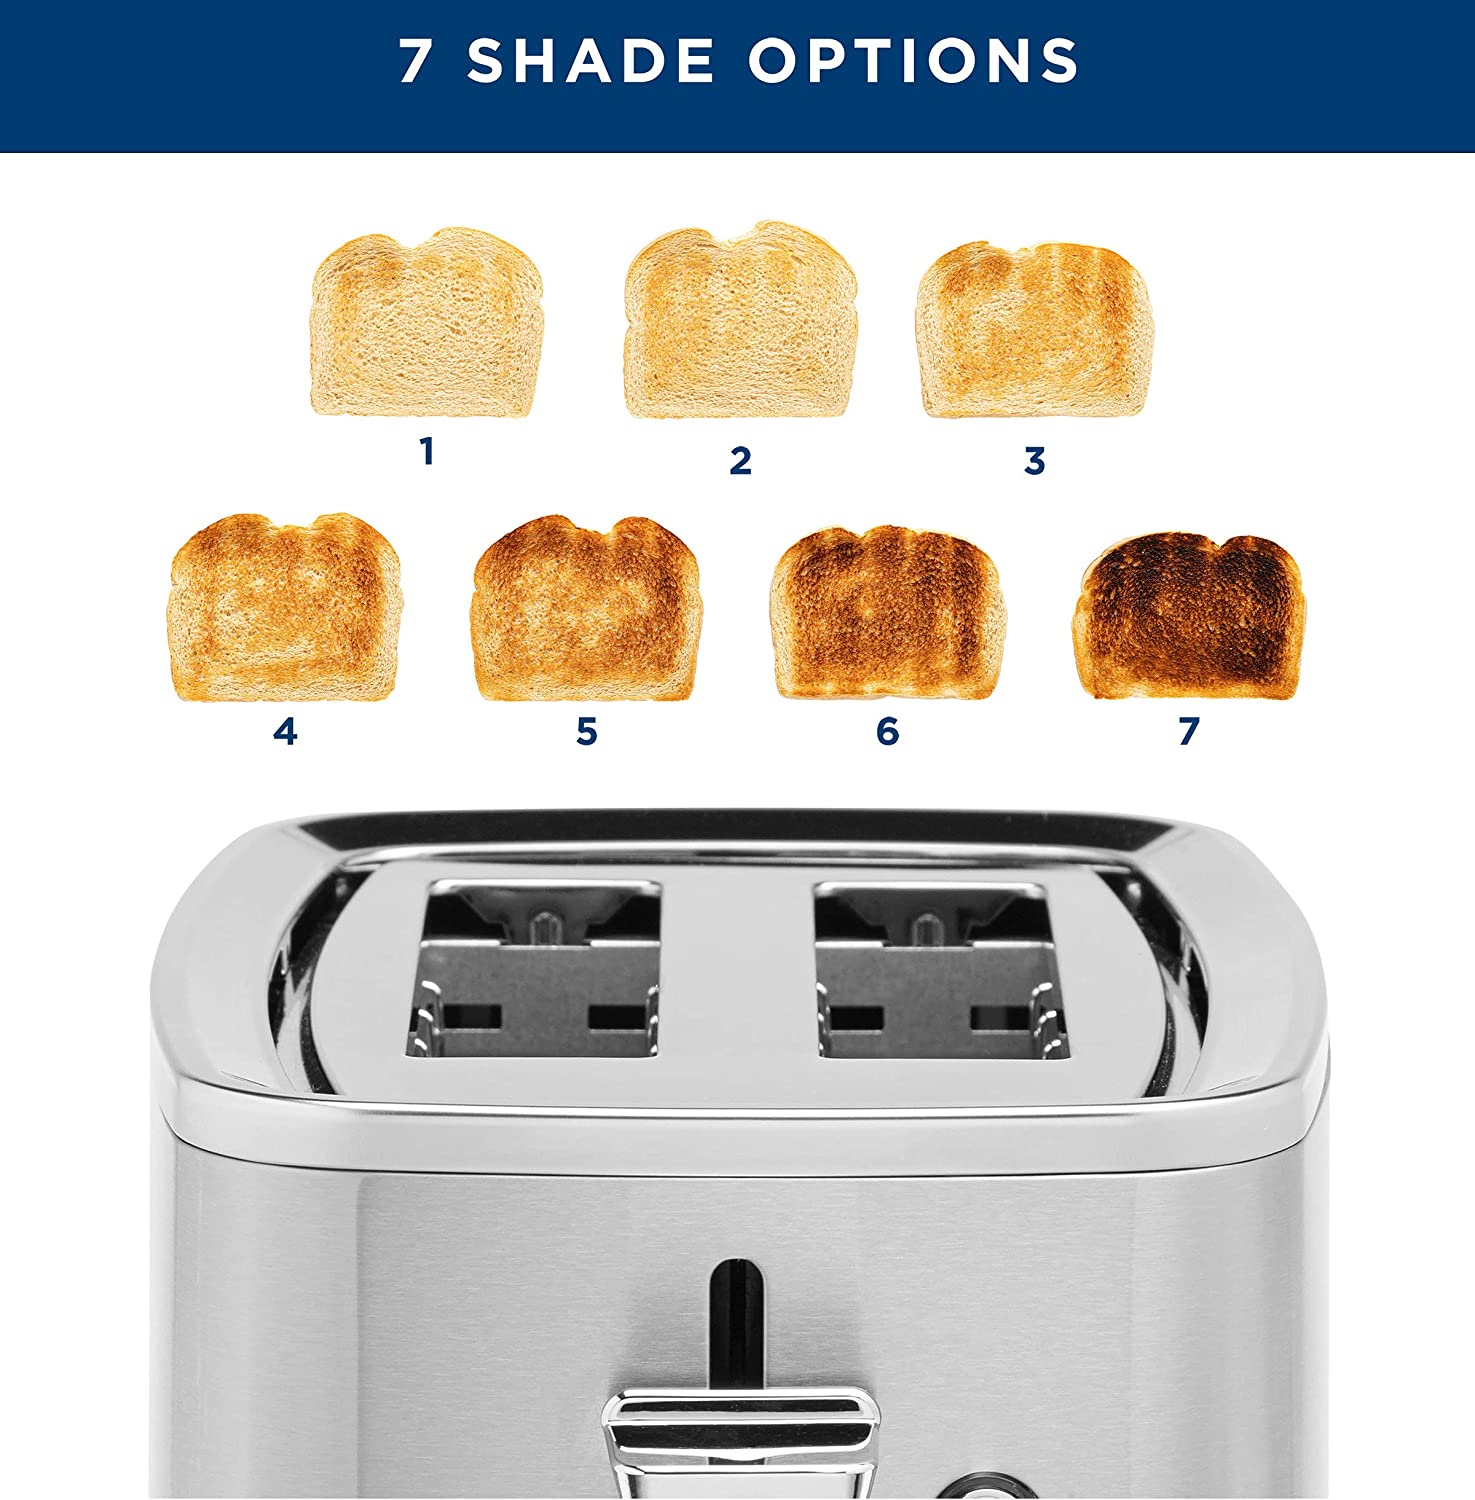 GE Stainless Steel Toaster | 2 Slice | Extra Wide Slots for Toasting  Bagels, Breads, Waffles & More | 7 Shade Options for the Entire Household  to